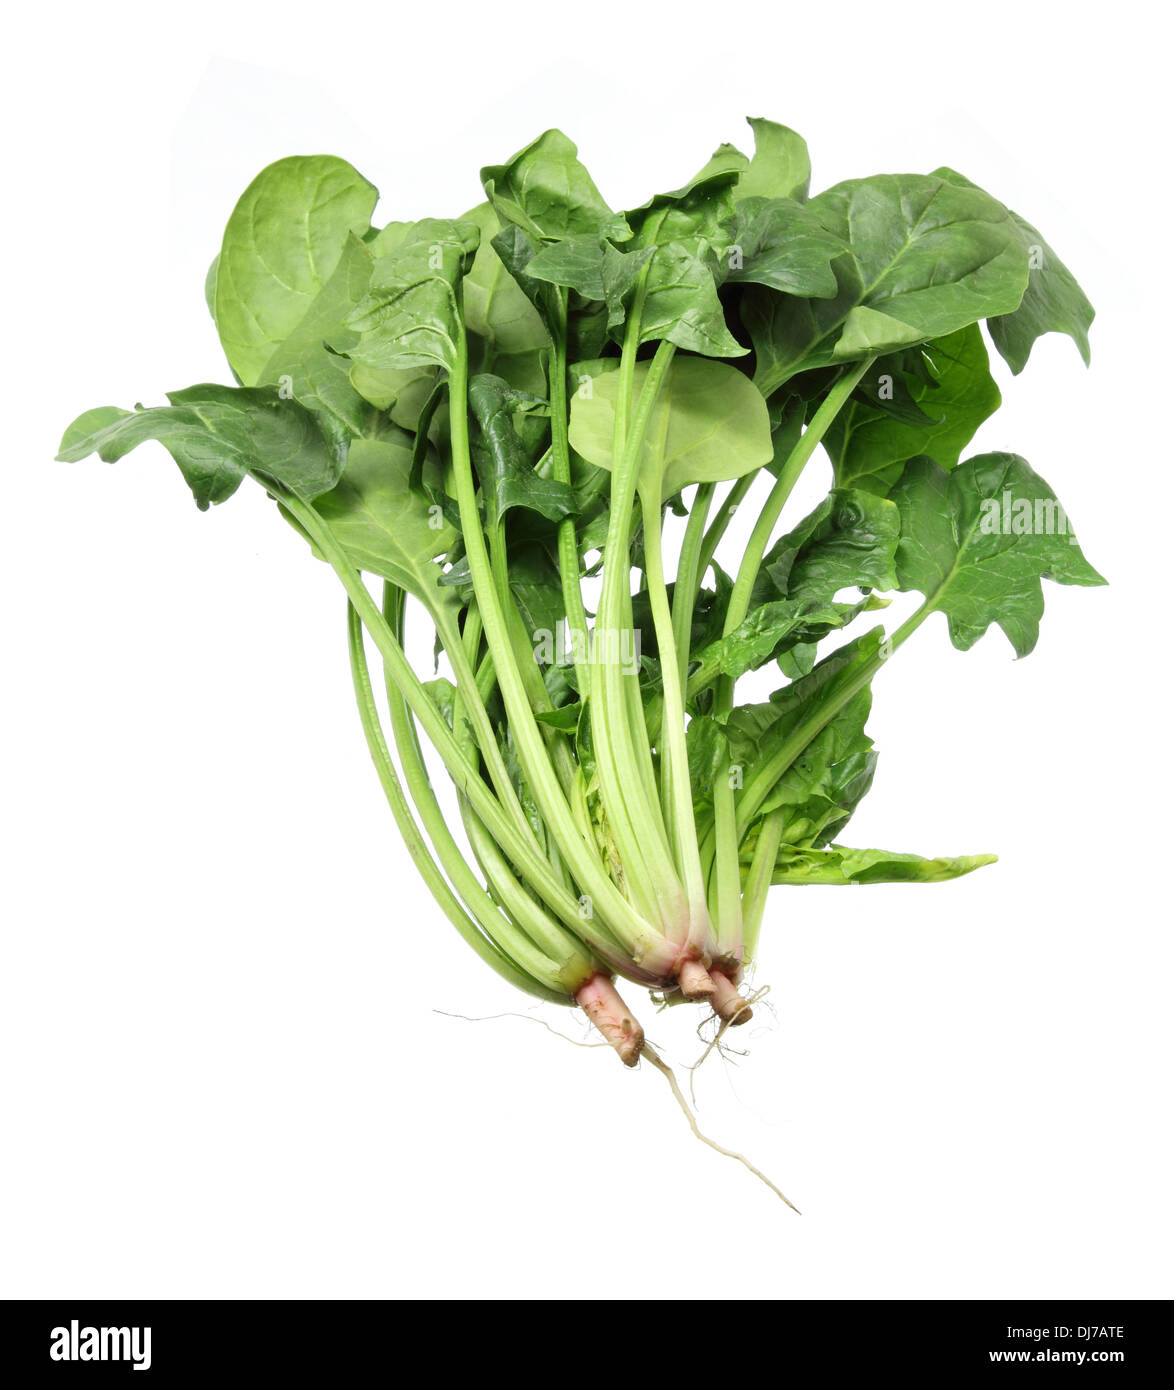 Bunches of Spinach Stock Photo